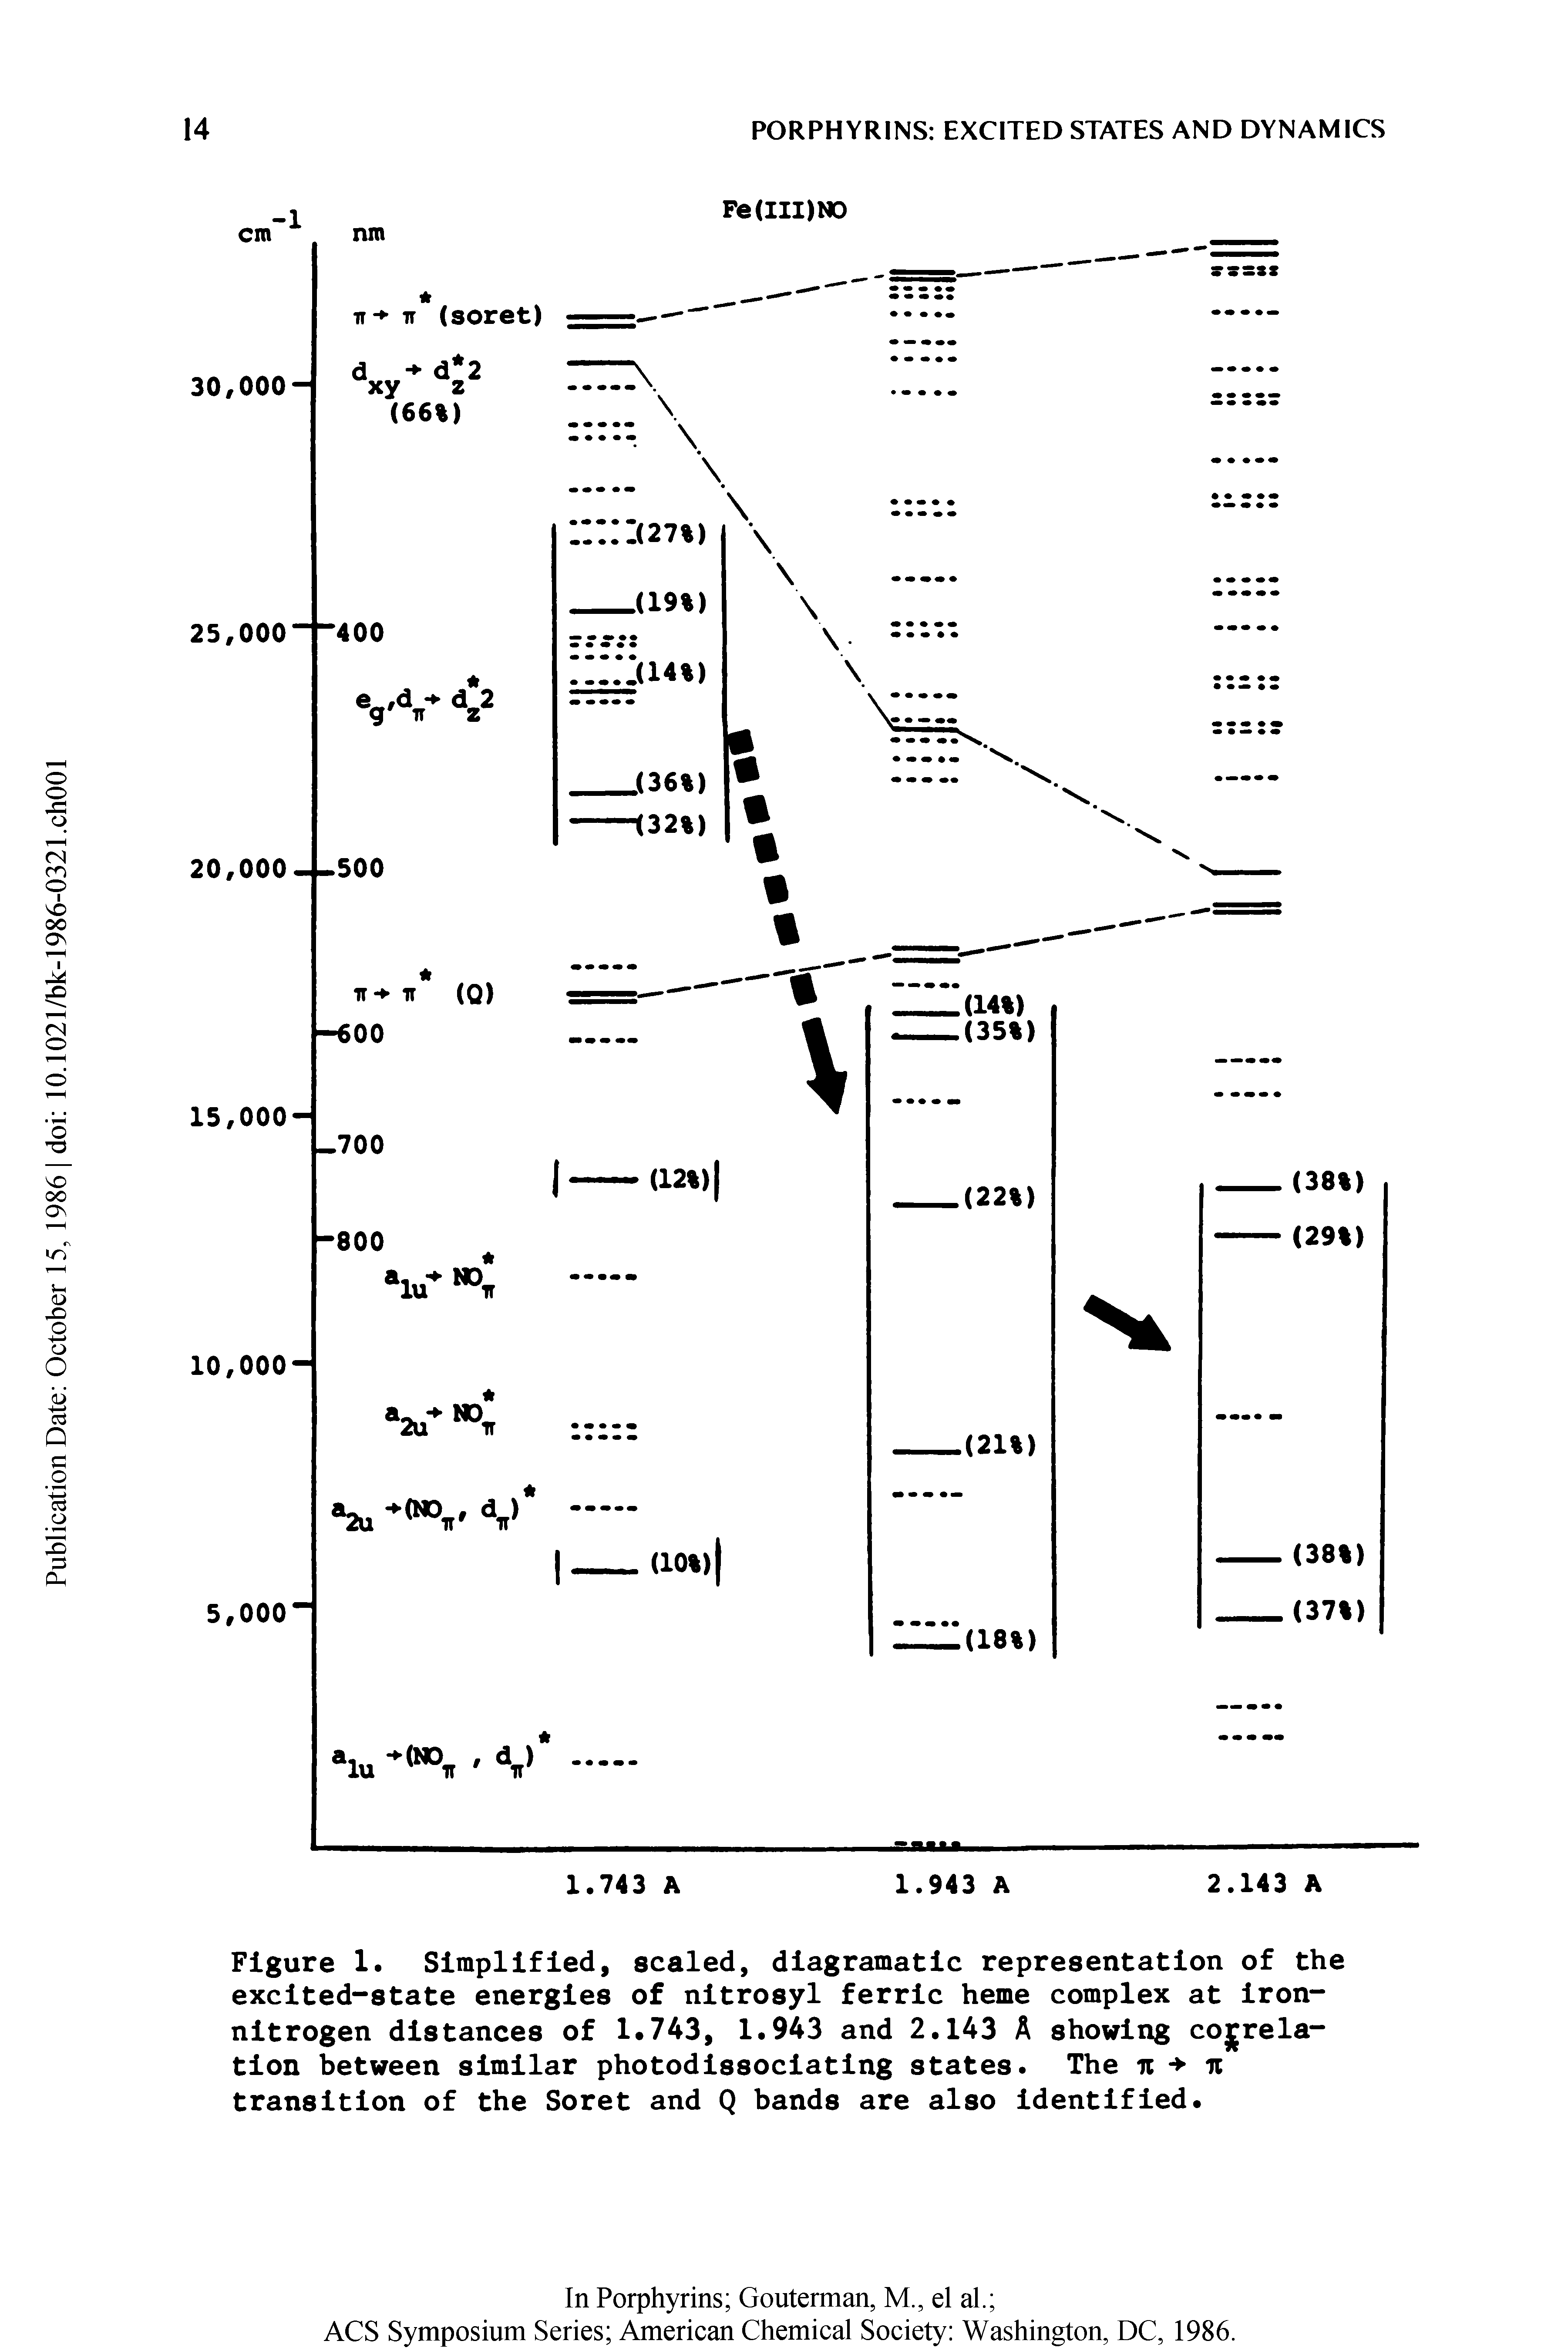 Figure 1. Simplified, scaled, diagramatic representation of the excited-state energies of nitrosyl ferric heme complex at iron-nitrogen distances of 1.743, 1.943 and 2.143 A showing correlation between similar photodissociating states. The n - n transition of the Soret and Q bands are also identified.